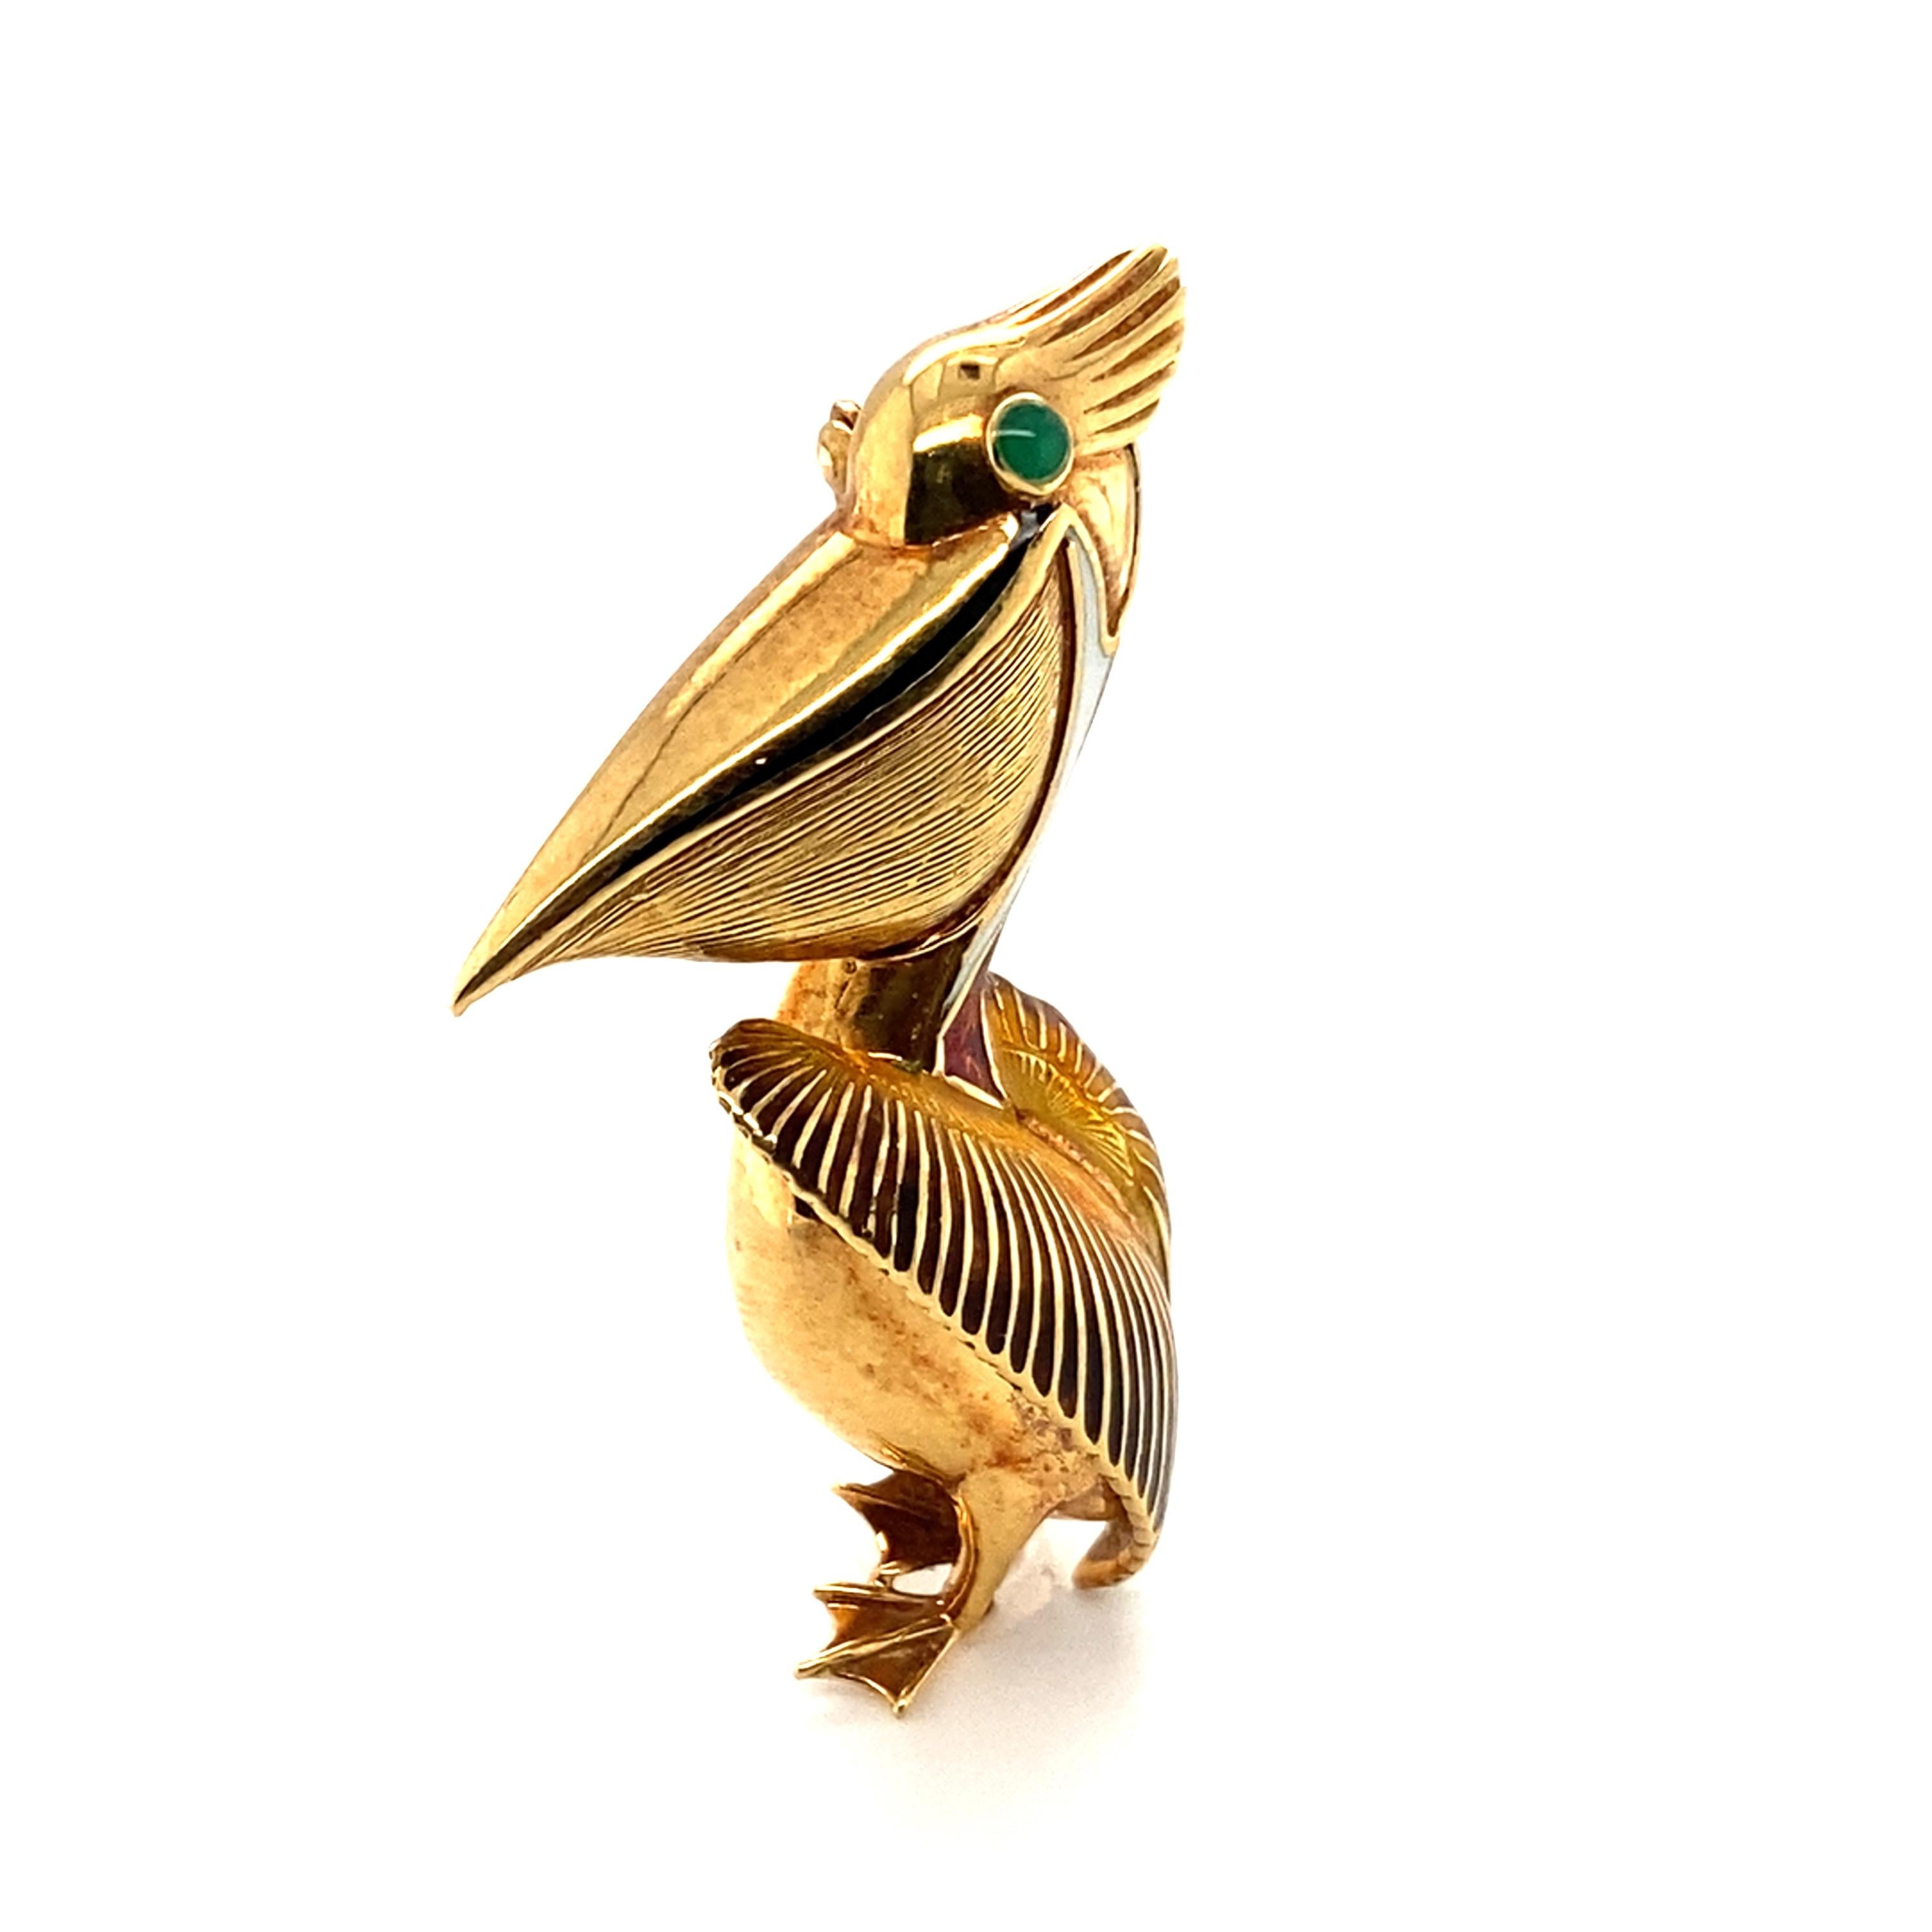 Item Details: 
Metal: 18 Karat Yellow Gold 
Weight: 10.6 grams 
Measurements: 2 inches long x 1 inch wide

Item Features:
Beautifully crafted 1970s vintage enamel pelican set in 18 karat yellow gold. Has intricate enamel work and a green emerald